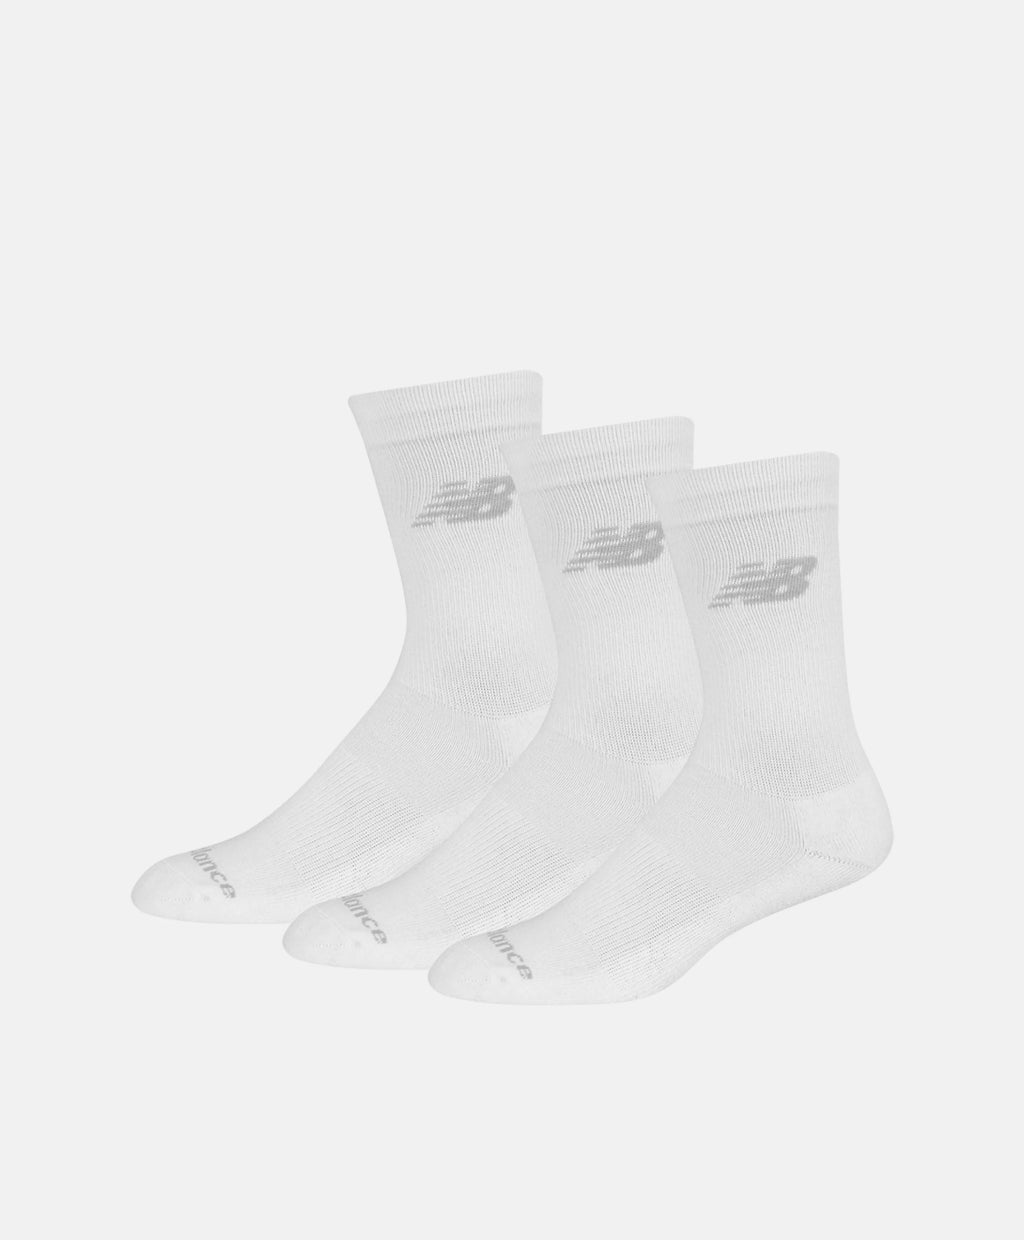 PERFORMANCE COTTON CUSHIONED CREW SOCKS 3 PACK WHITE